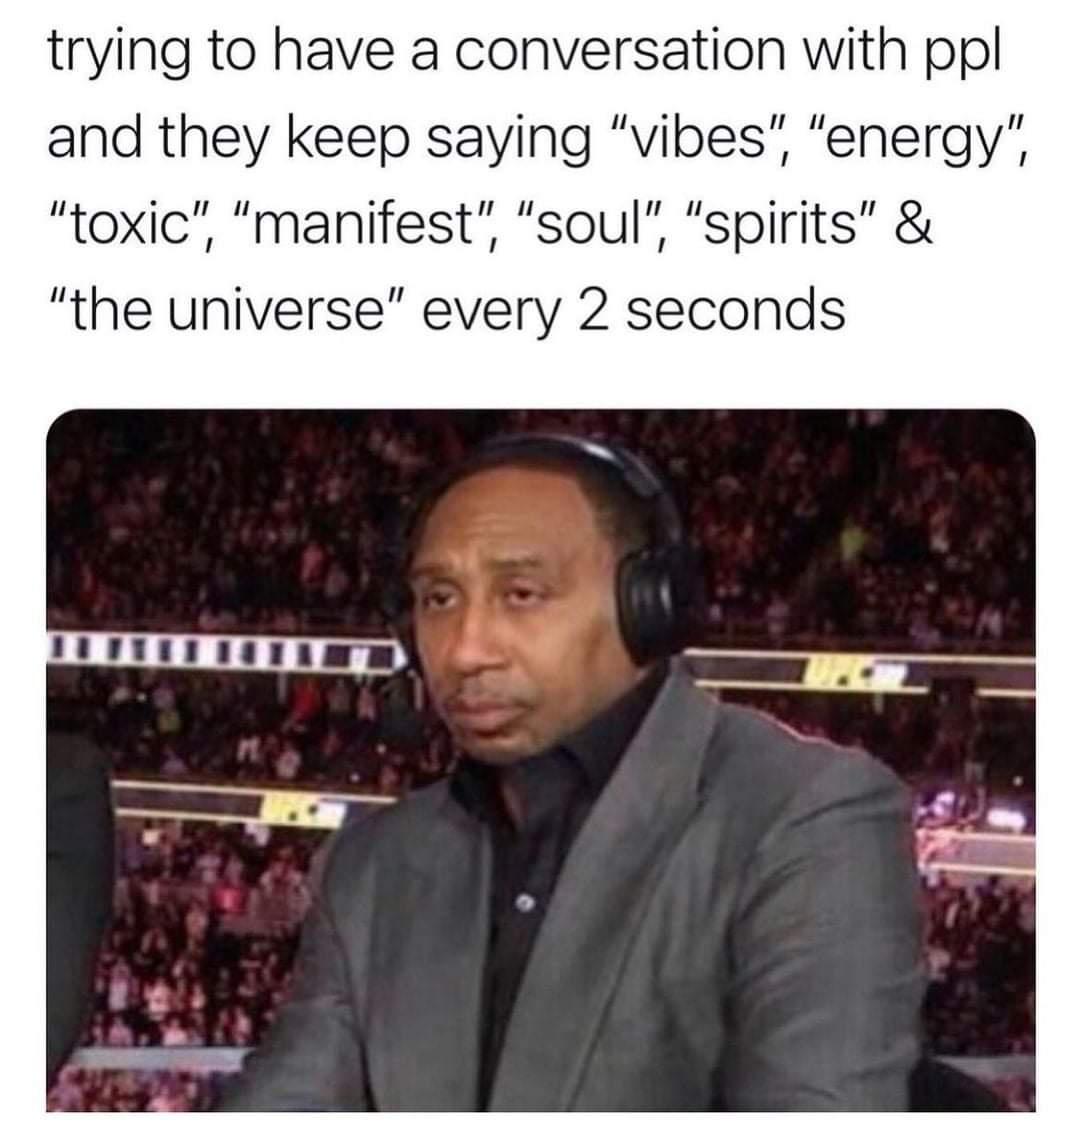 monday morning randomness - stephen a smith meme - trying to have a conversation with ppl and they keep saying "vibes", "energy", "toxic", "manifest", "soul", "spirits" & "the universe" every 2 seconds